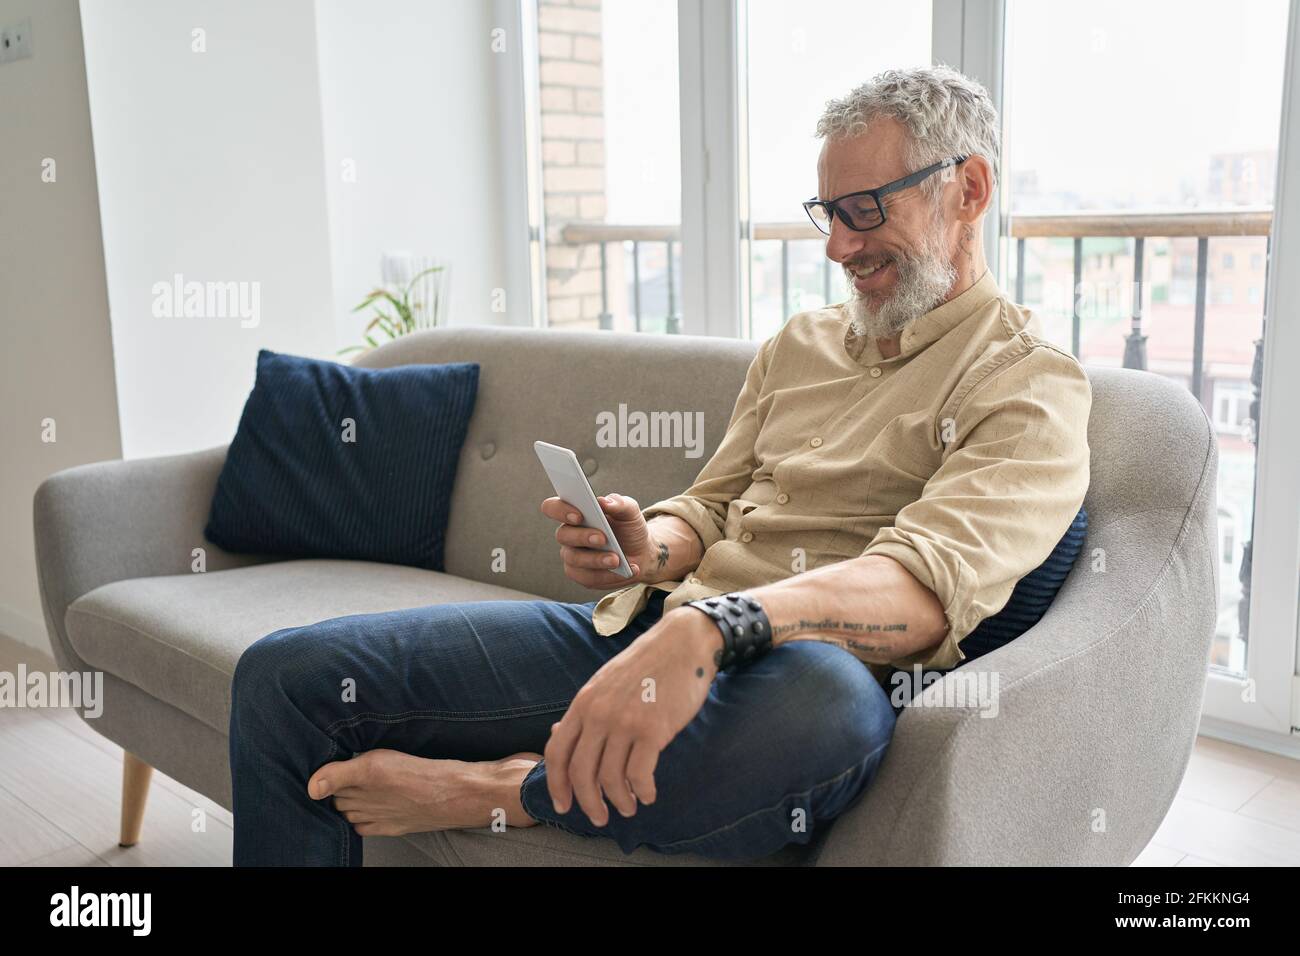 Happy older middle aged man using phone relaxing sitting on couch at home. Stock Photo